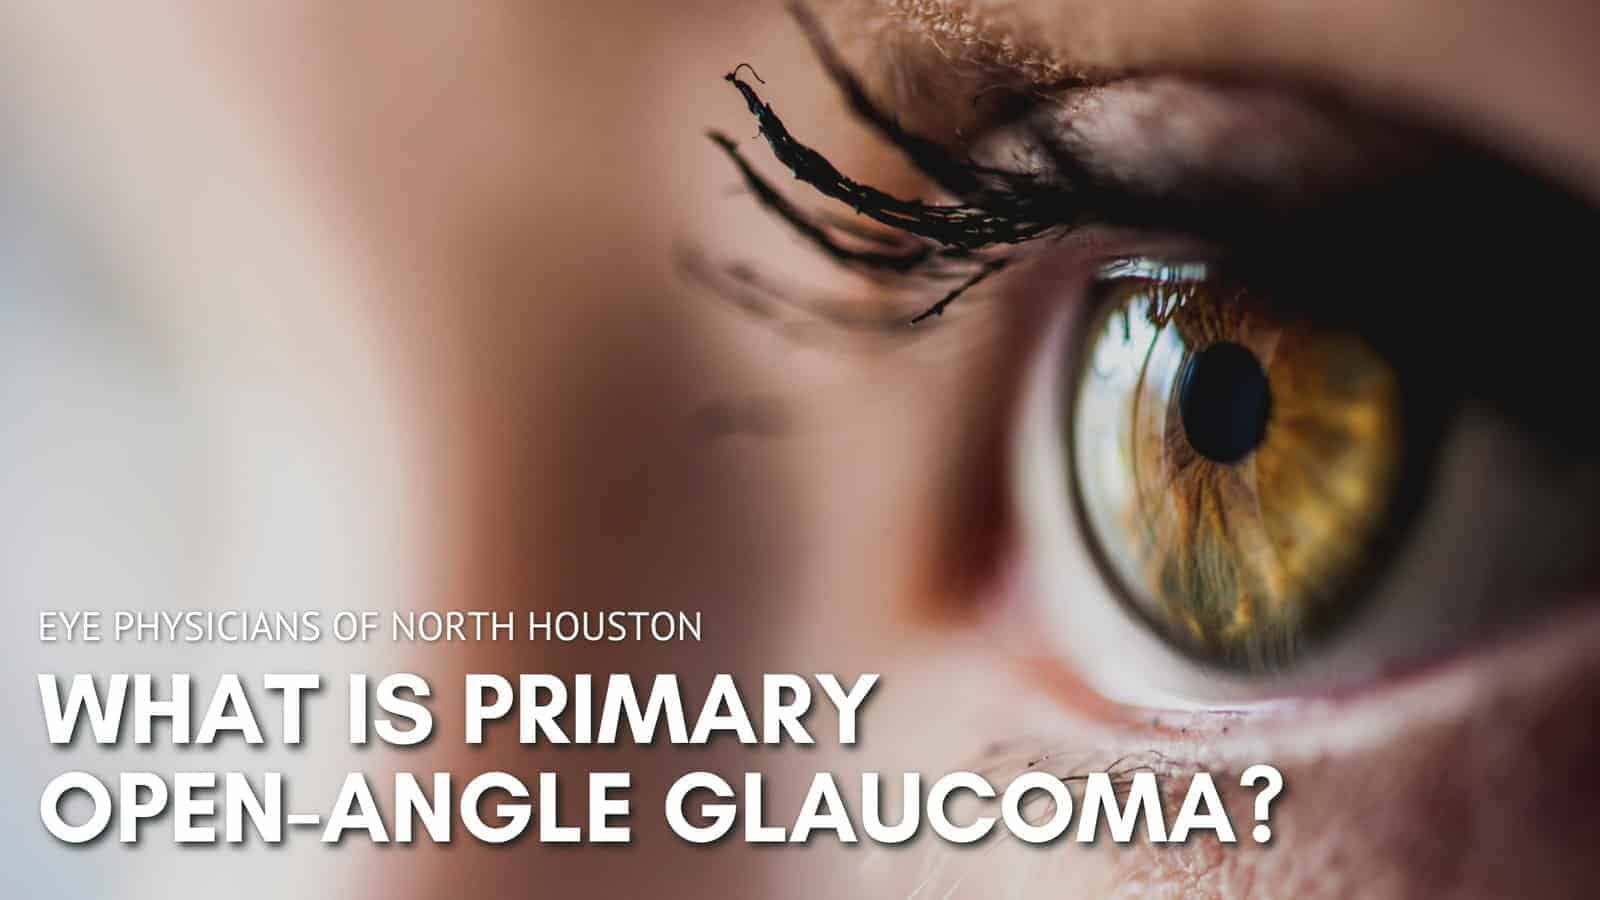 What is Primary Open-Angle Glaucoma?